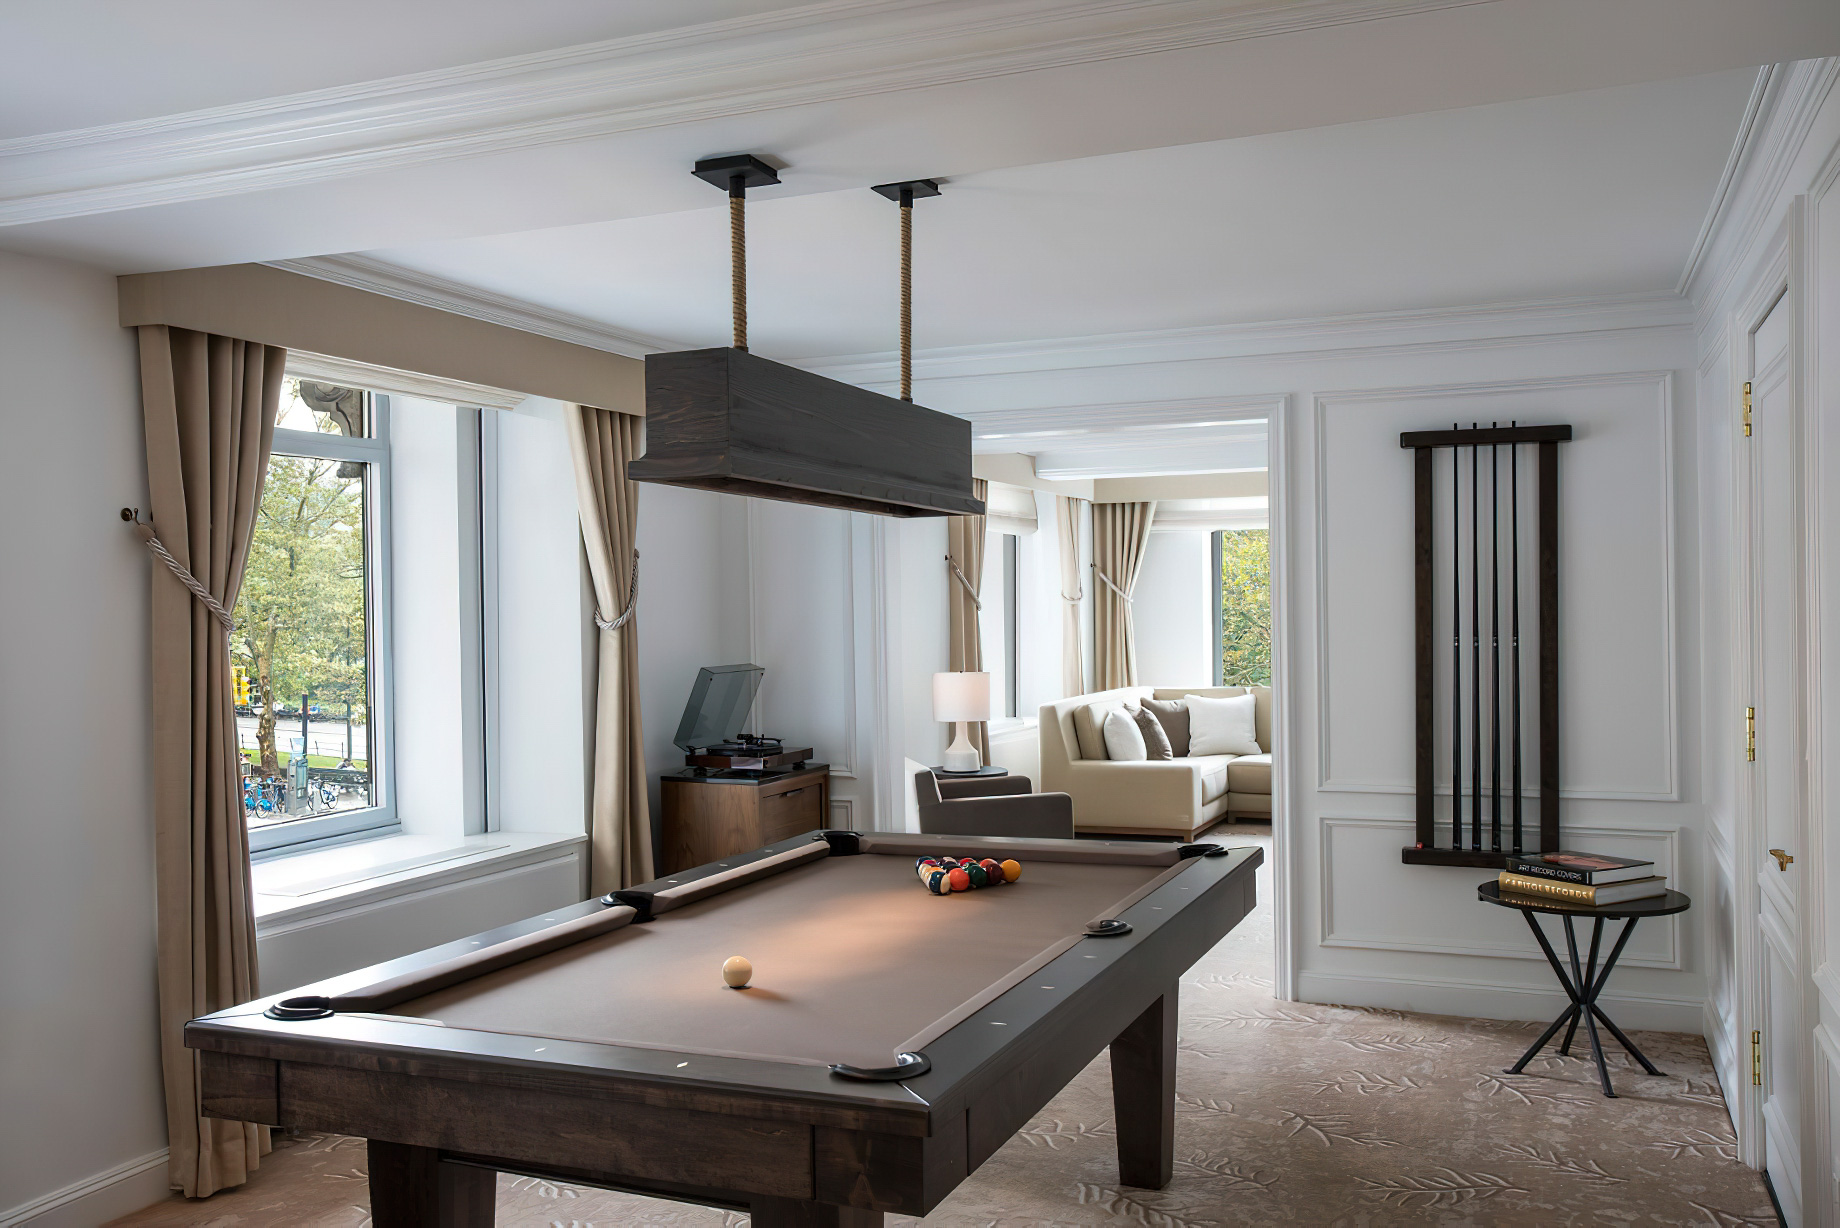 The Ritz-Carlton New York, Central Park Hotel – New York, NY, USA – The Artists Gate Suite Billiards Room